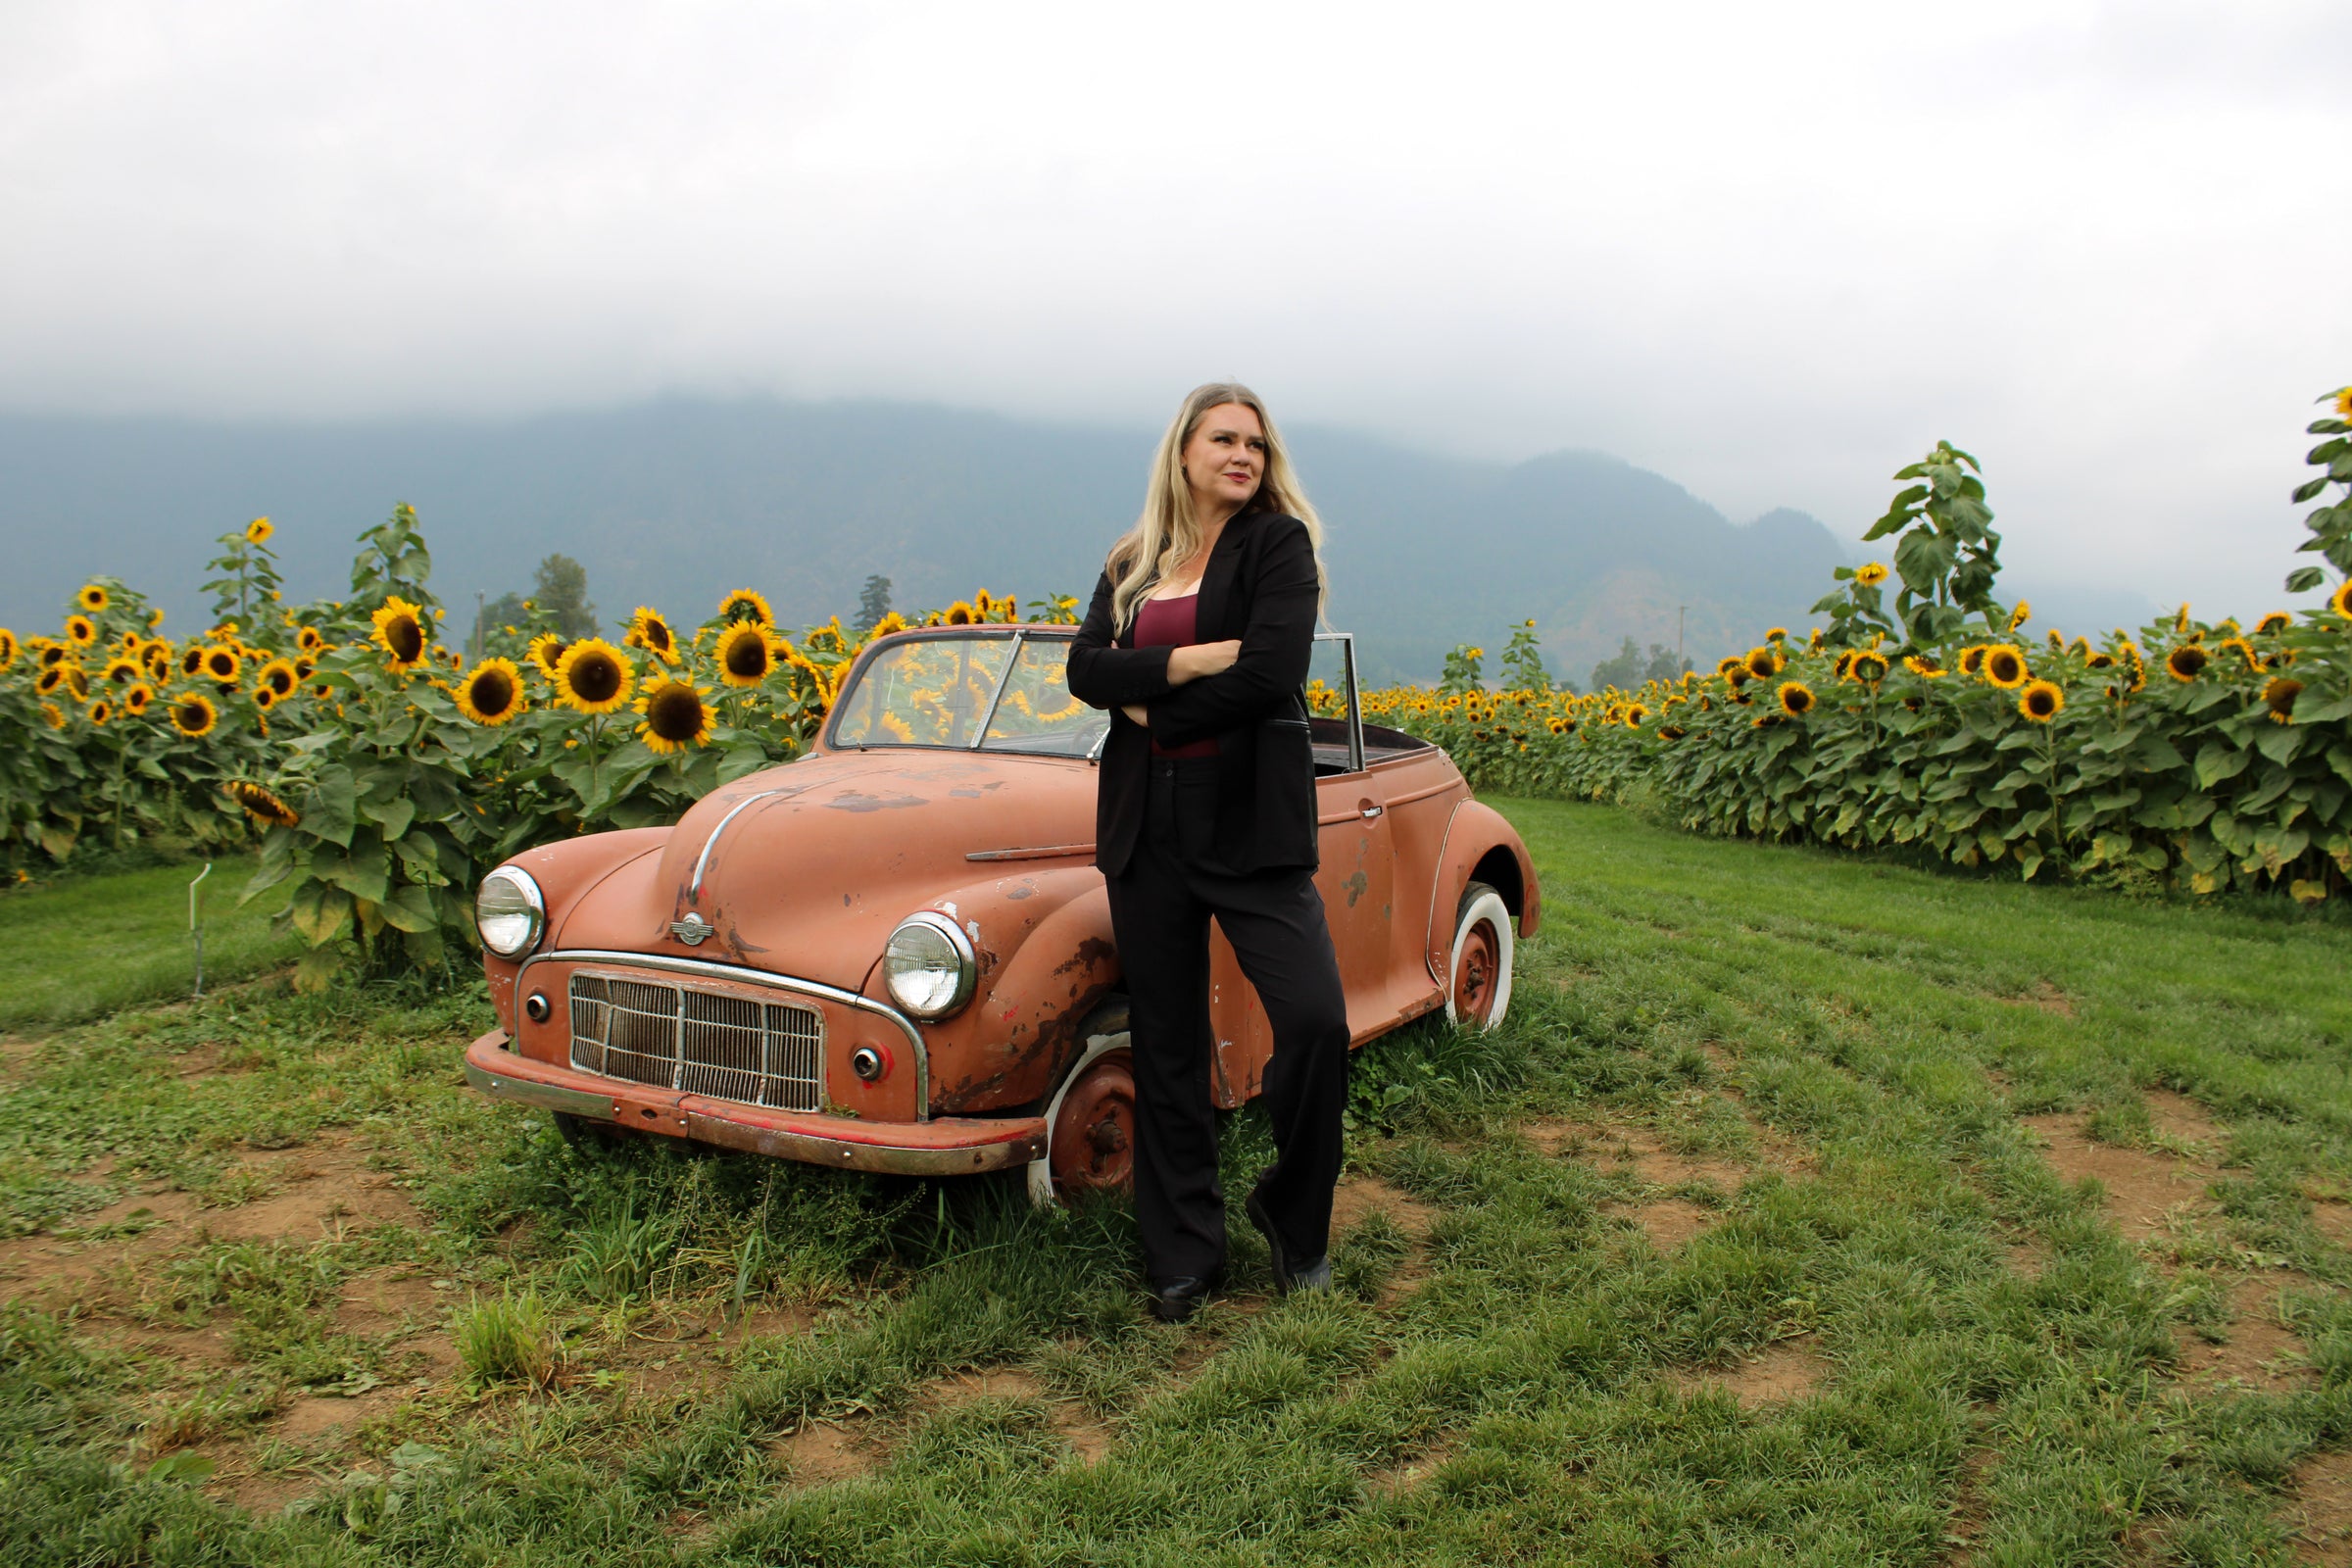 Leanne standing in a sunflower field in a black tailored suit, leaning on a vintage car.